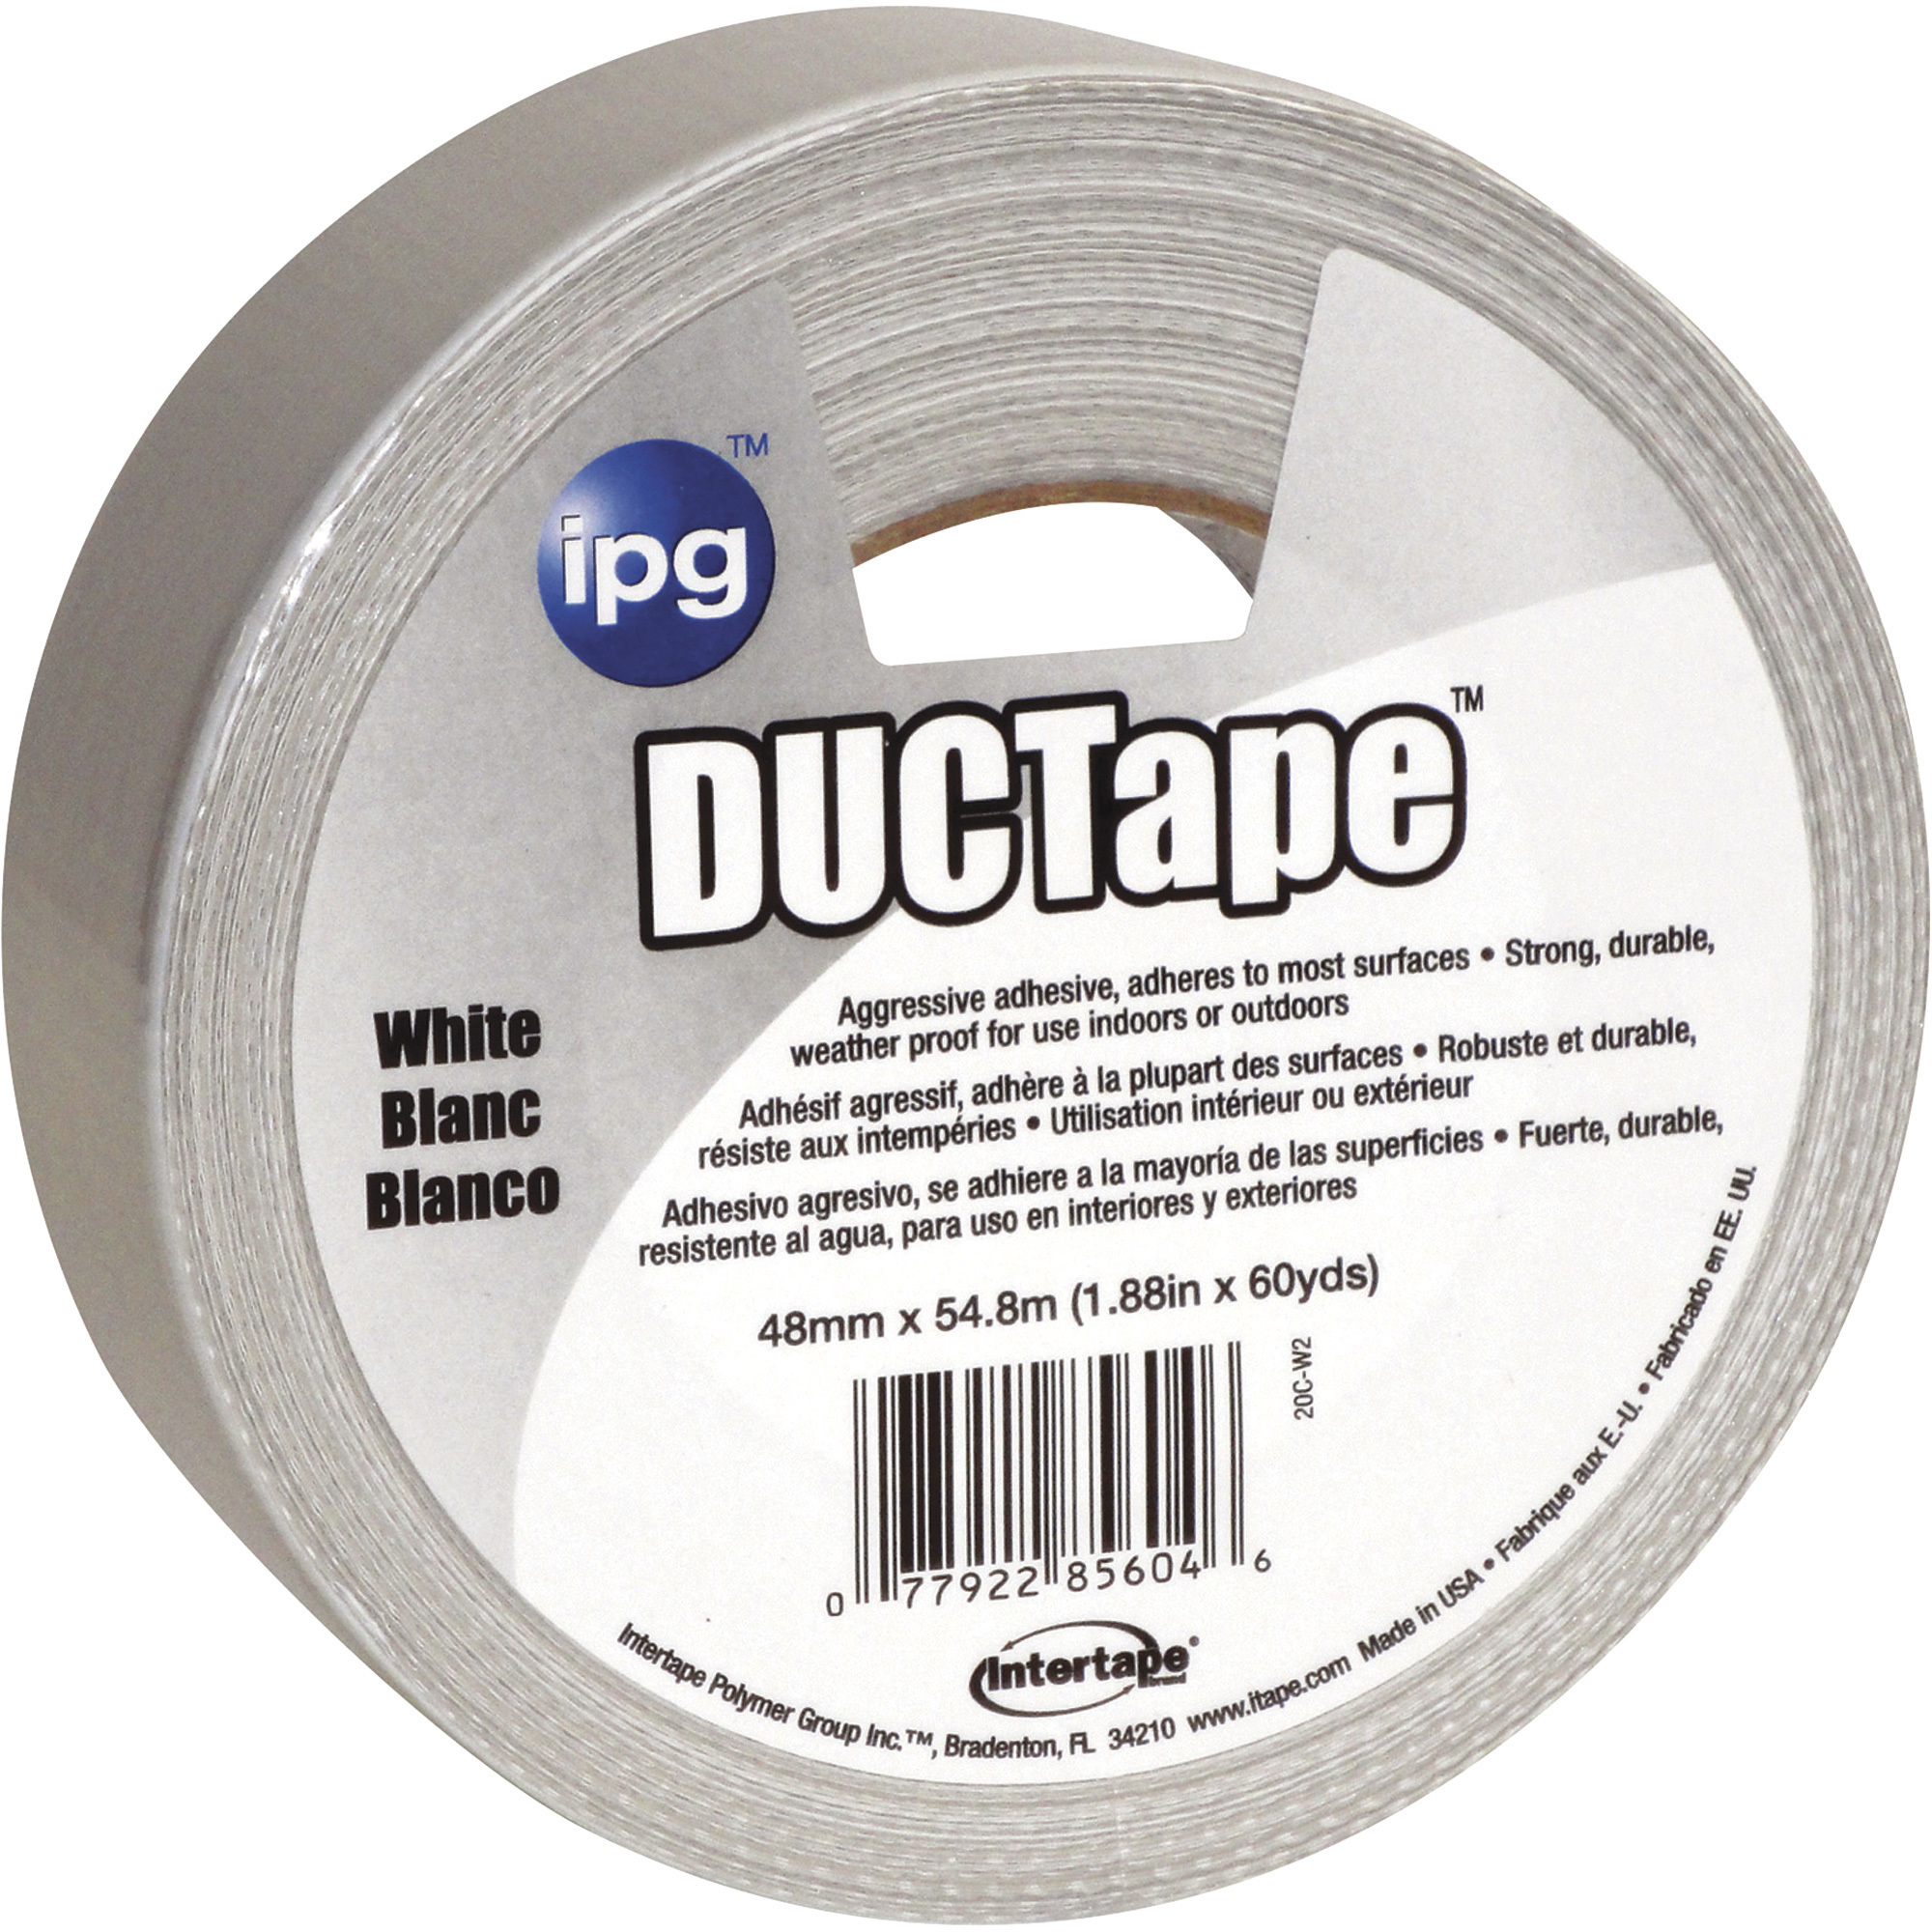 IPG DucTape â 1.88Inch W x 60 Yards, White, Model 91364